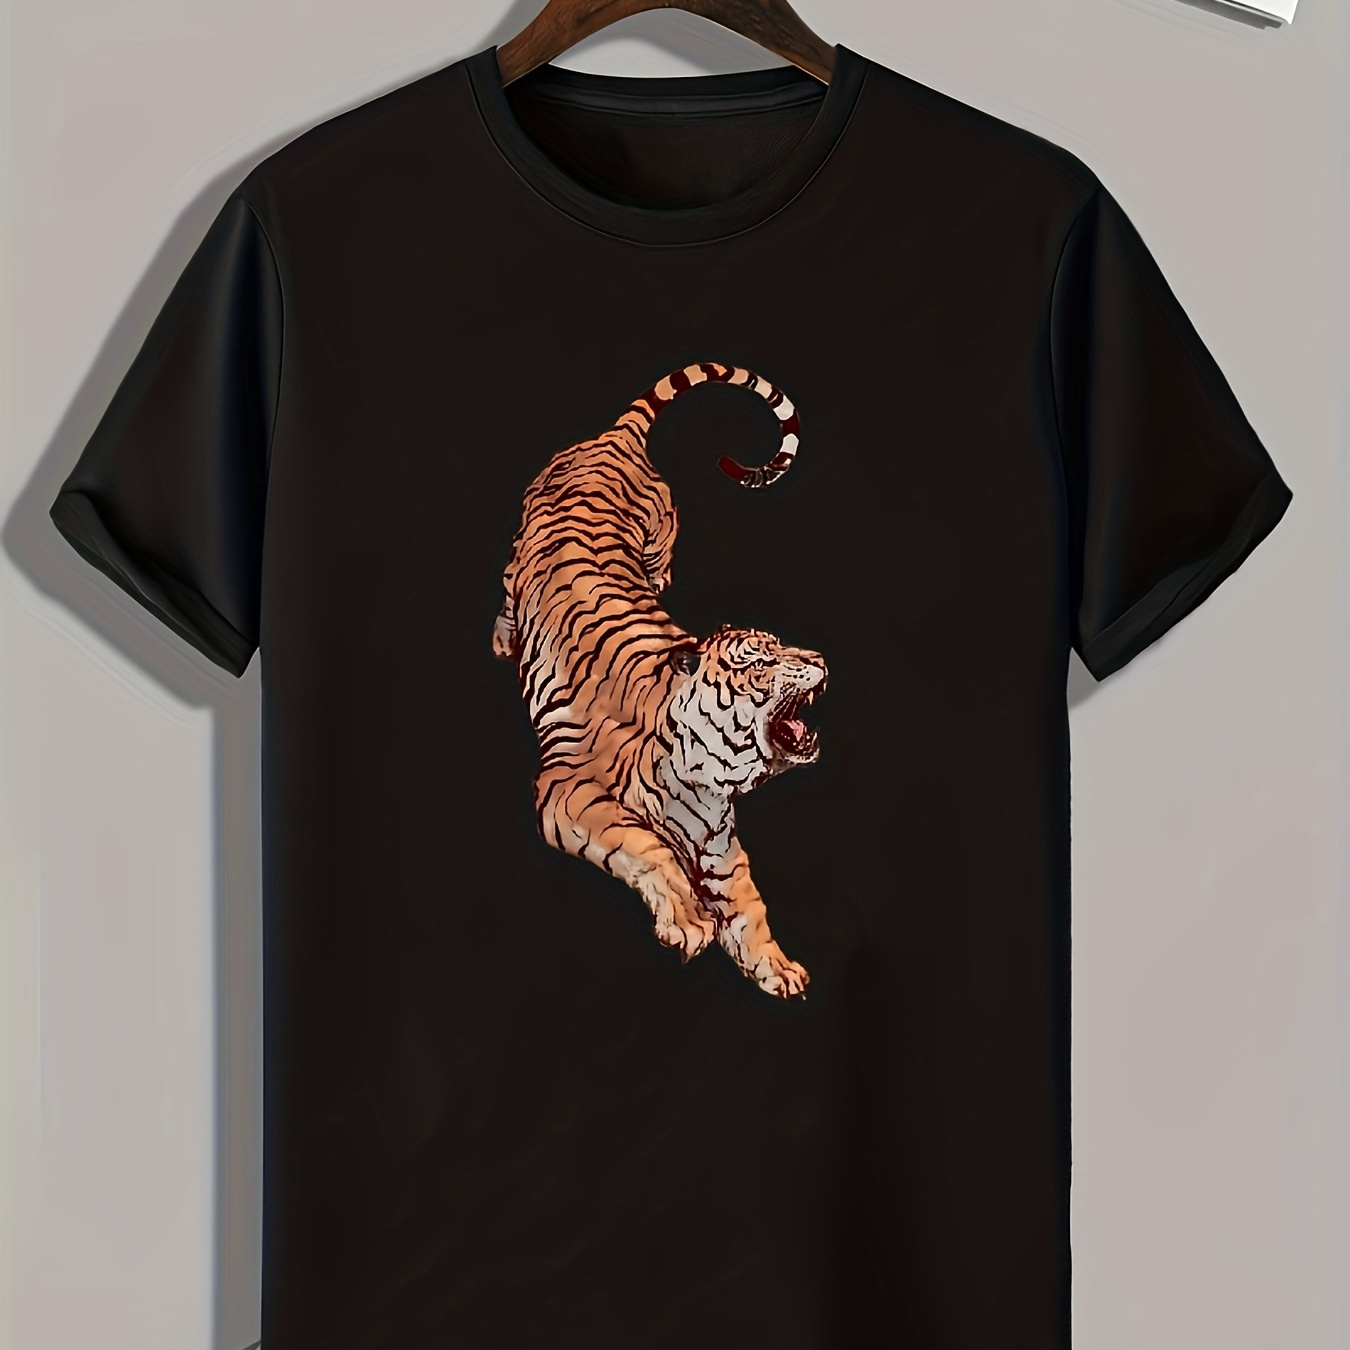 

Fierce Tiger Print, Men's Trendy Comfy T-shirt, Active Slightly Stretch Breathable Tee For Outdoor Summer